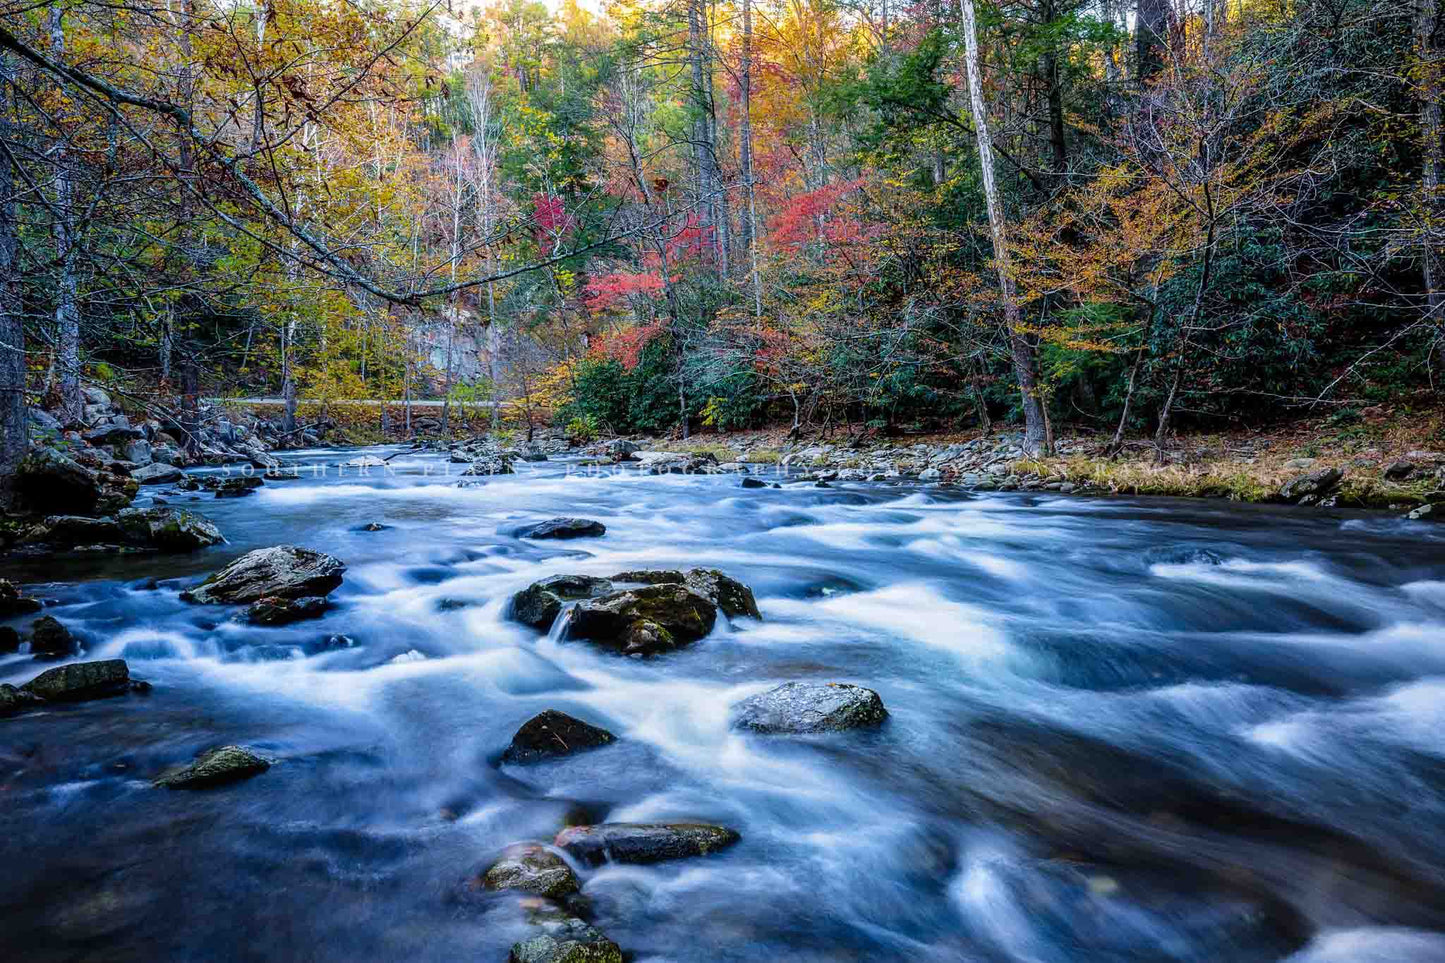 Nature photography print of Laurel Creek rushing through a forest full of fall color on an autumn day in Great Smoky Mountains National Park by Sean Ramsey of Southern Plains Photography.